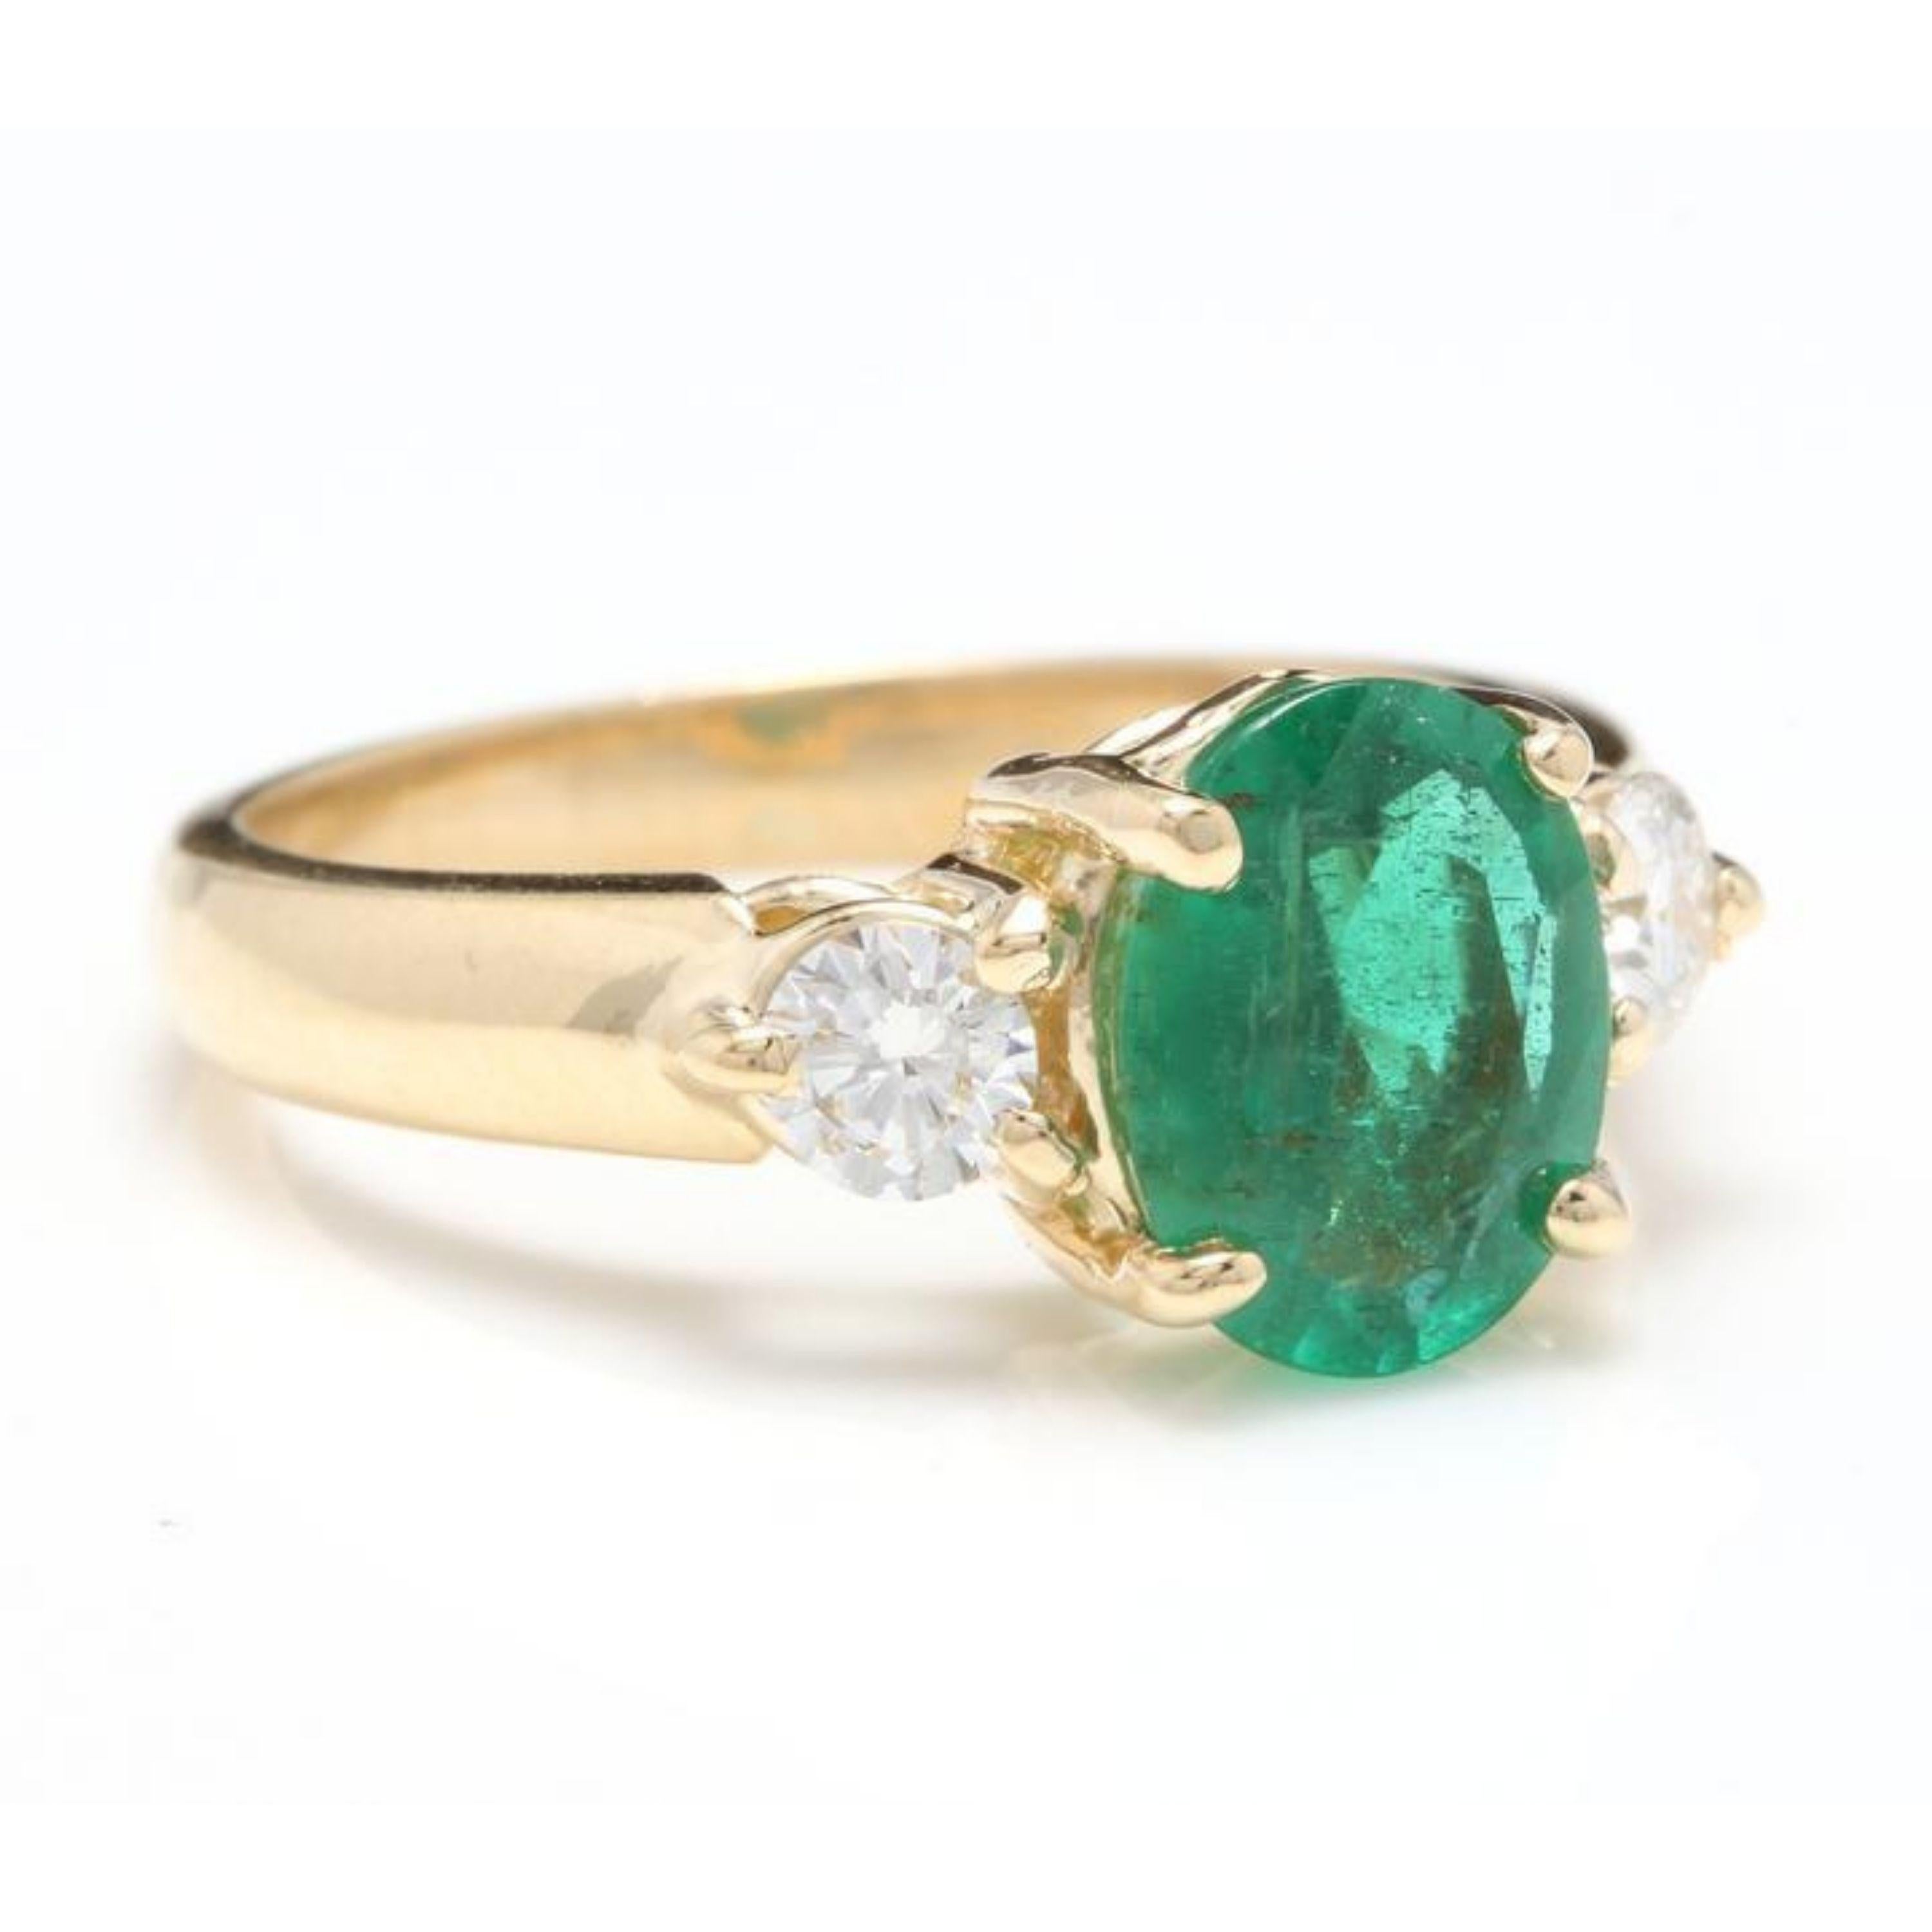 2.16 Carats Natural Emerald and Diamond 14K Solid Yellow Gold Ring

Total Natural Green Emerald Weight is: Approx. 1.80 Carats (transparent)

Emerald Measures: Approx. 9.00 x 7.00mm

Natural Round Diamonds Weight: 0.36 Carats (color H / Clarity